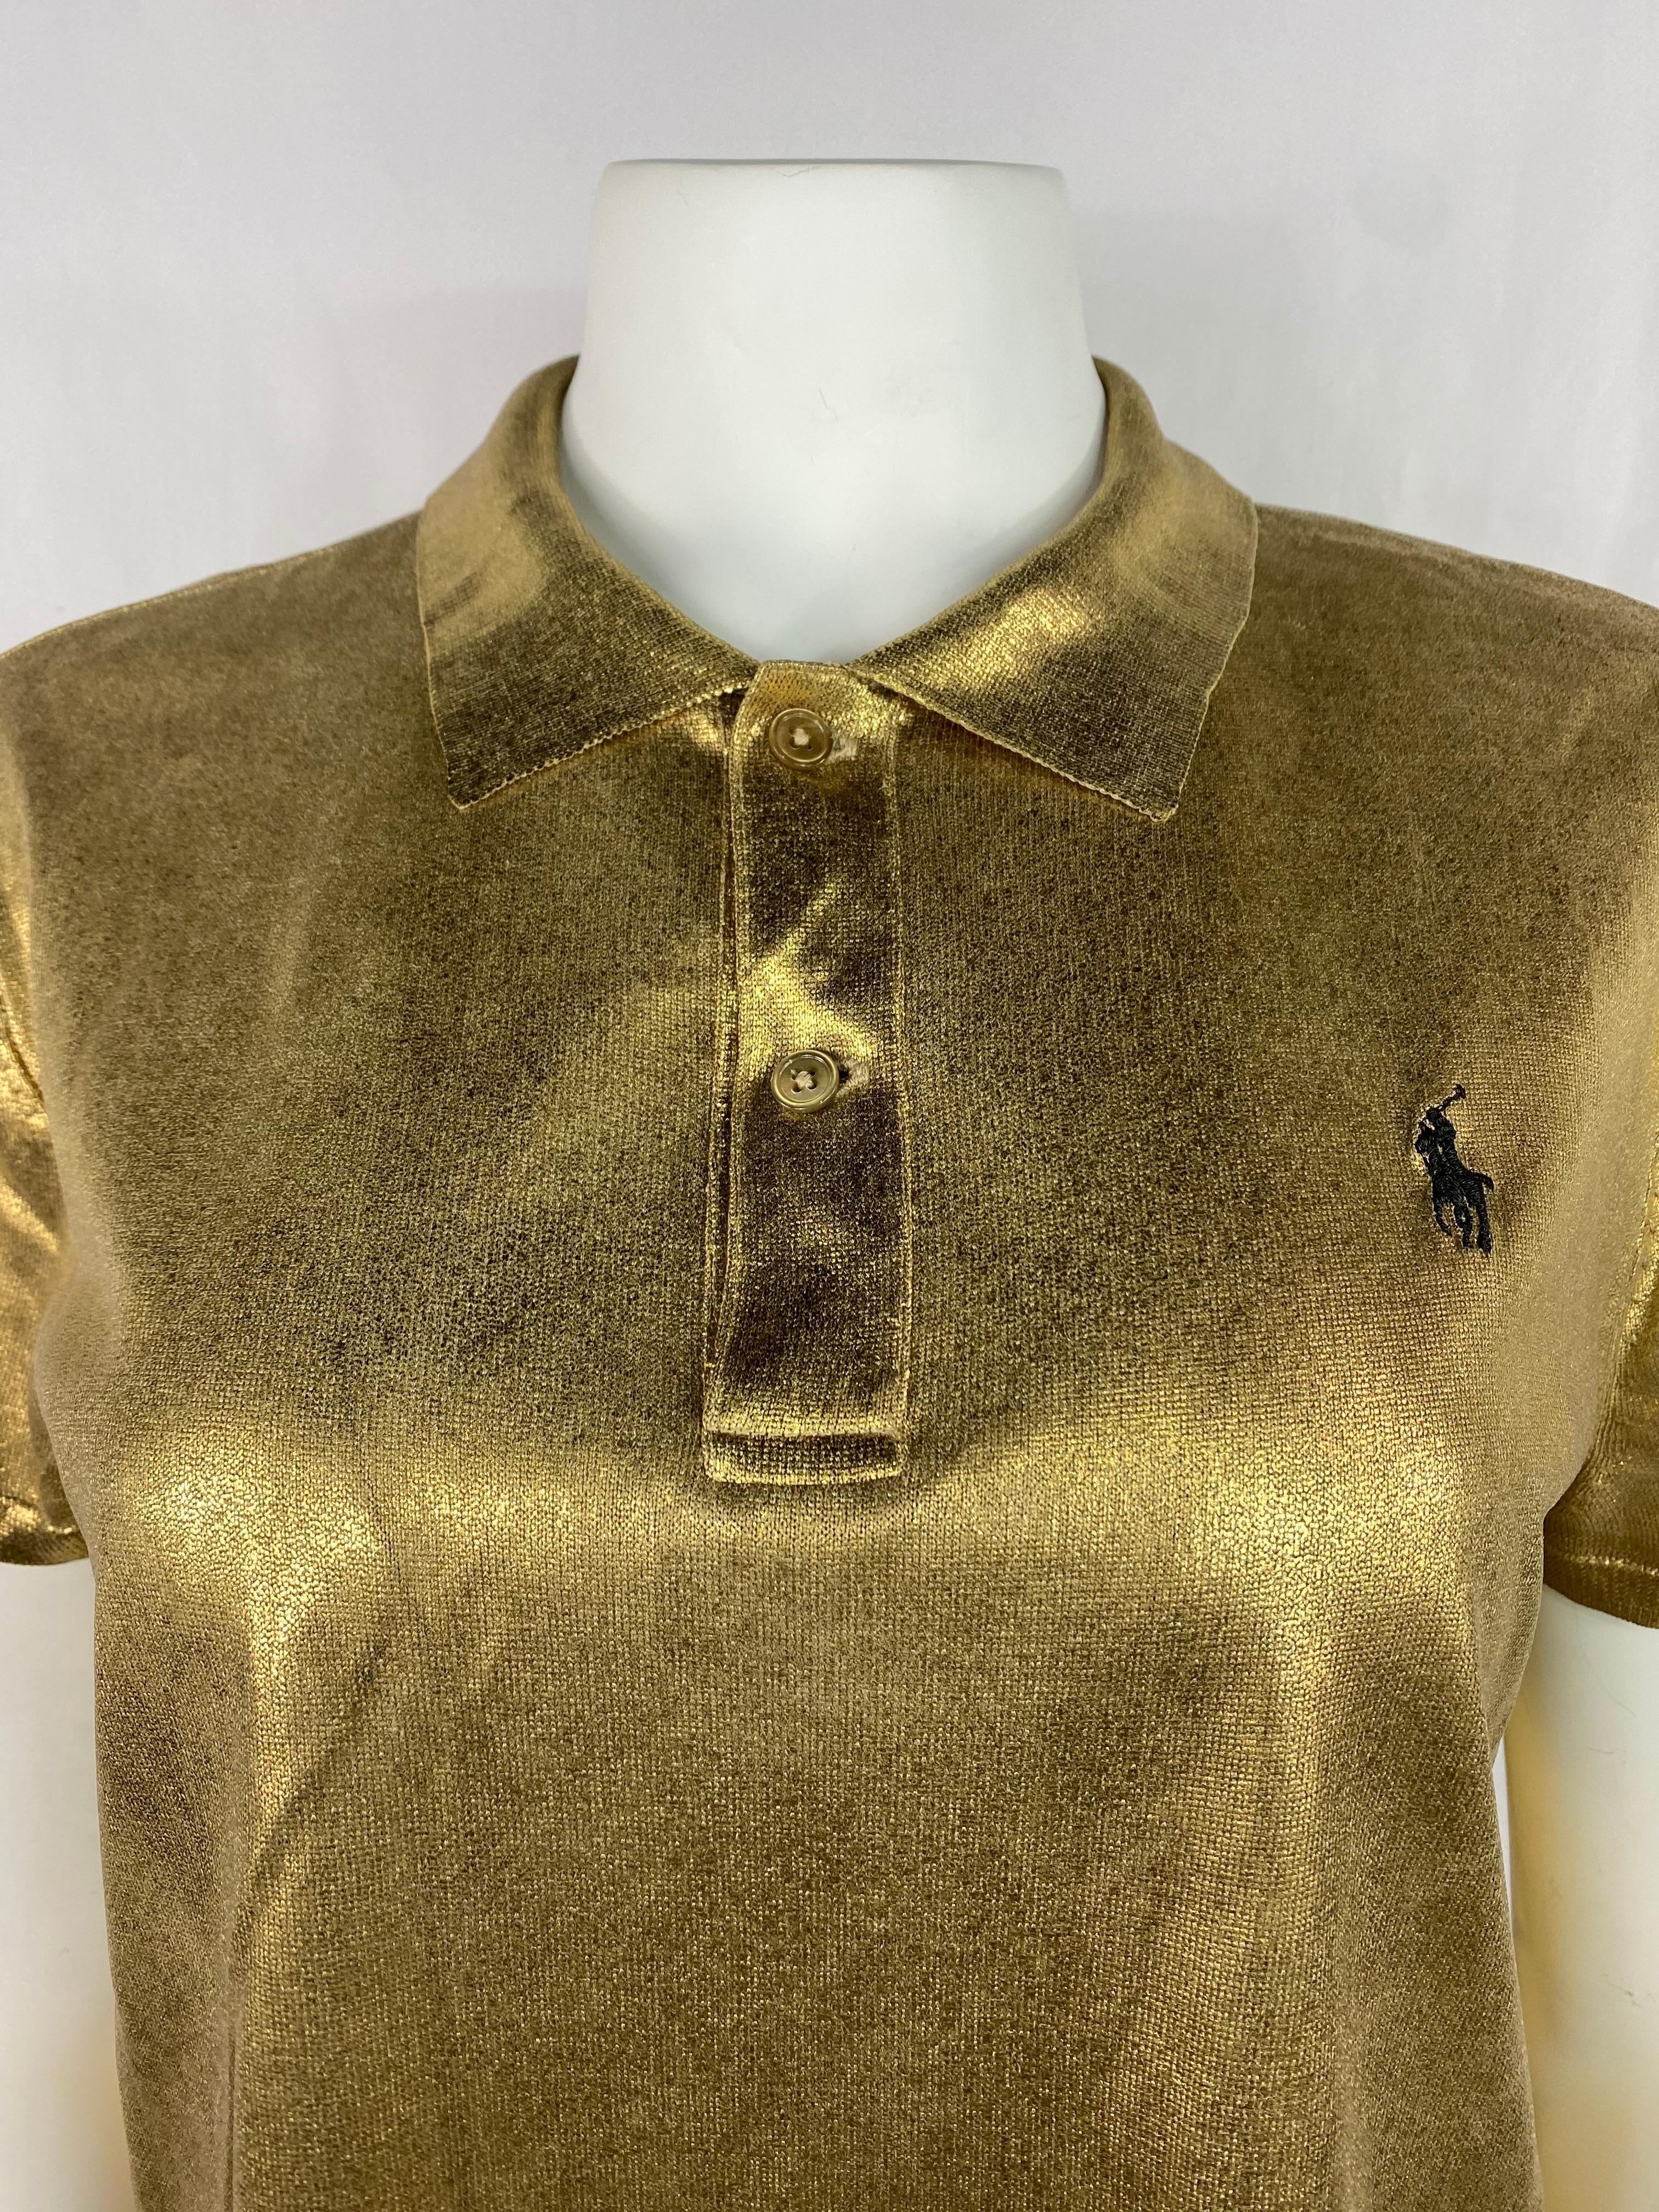 Product details:

The shirt features gold metallic finish with collar, two front button closure and black embroidered polo logo.